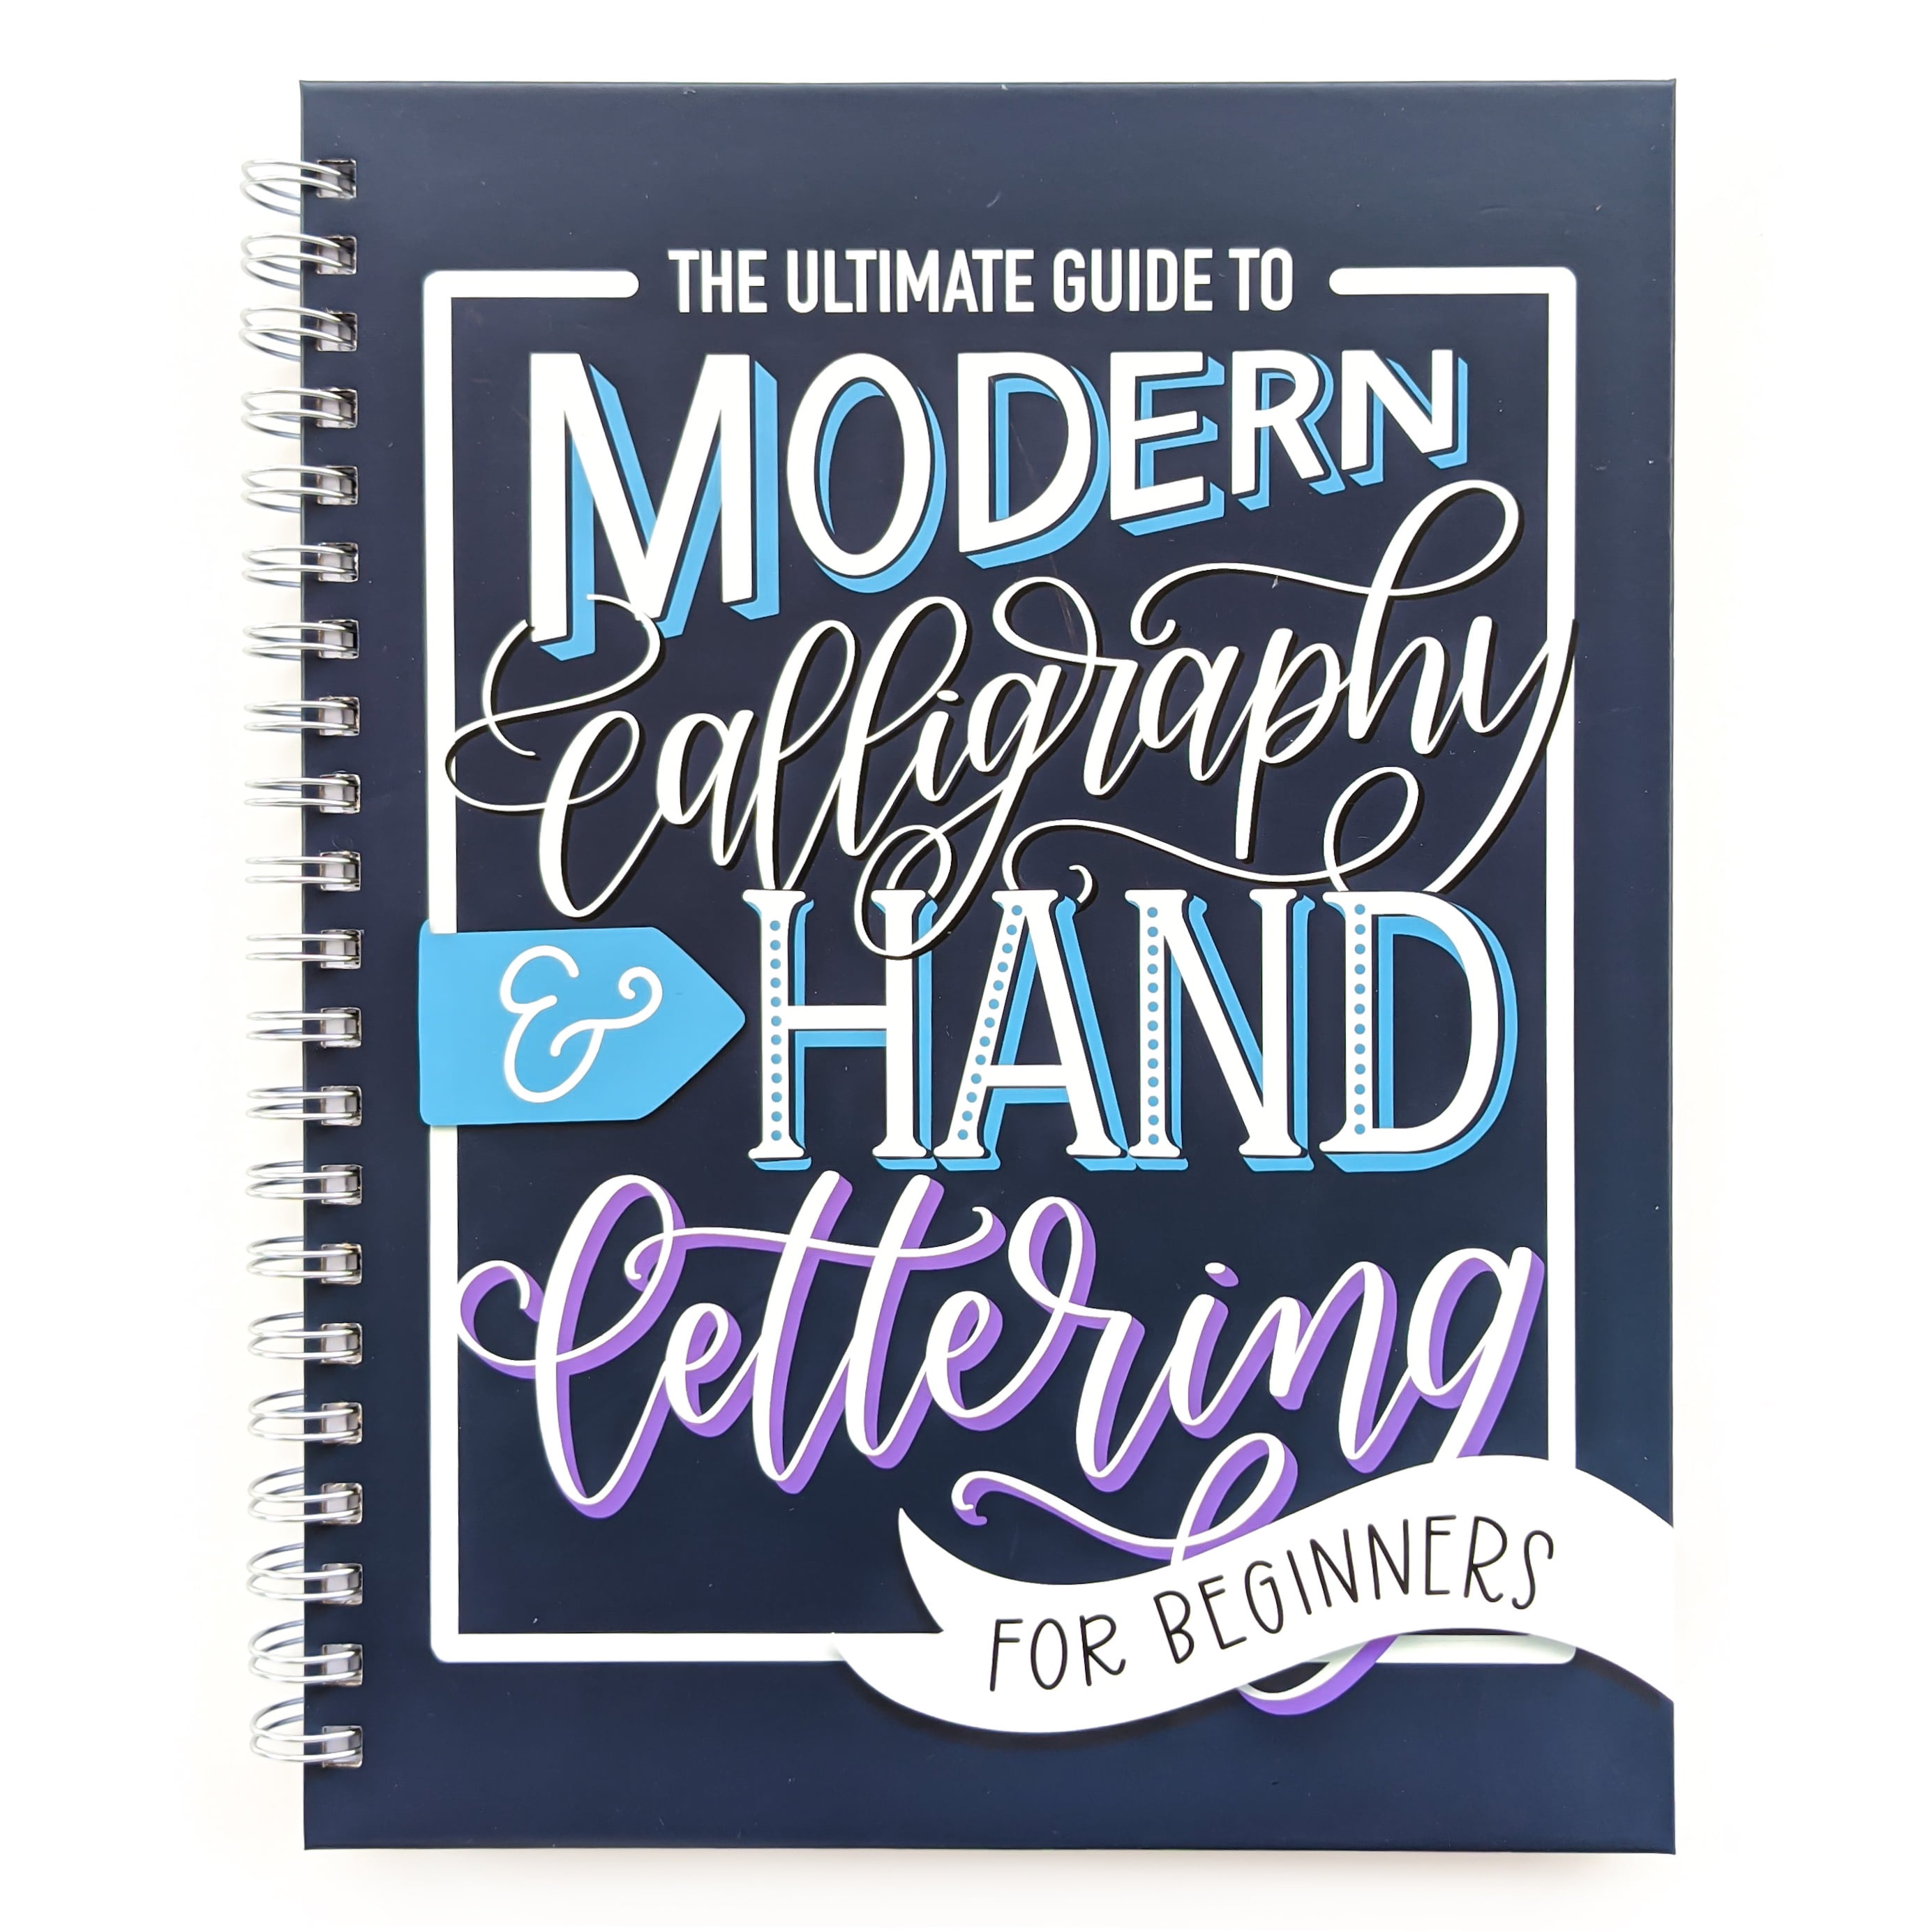 Calligraphy 101 - The ULTIMATE Guide For Beginners (link in comment) : r/ Calligraphy